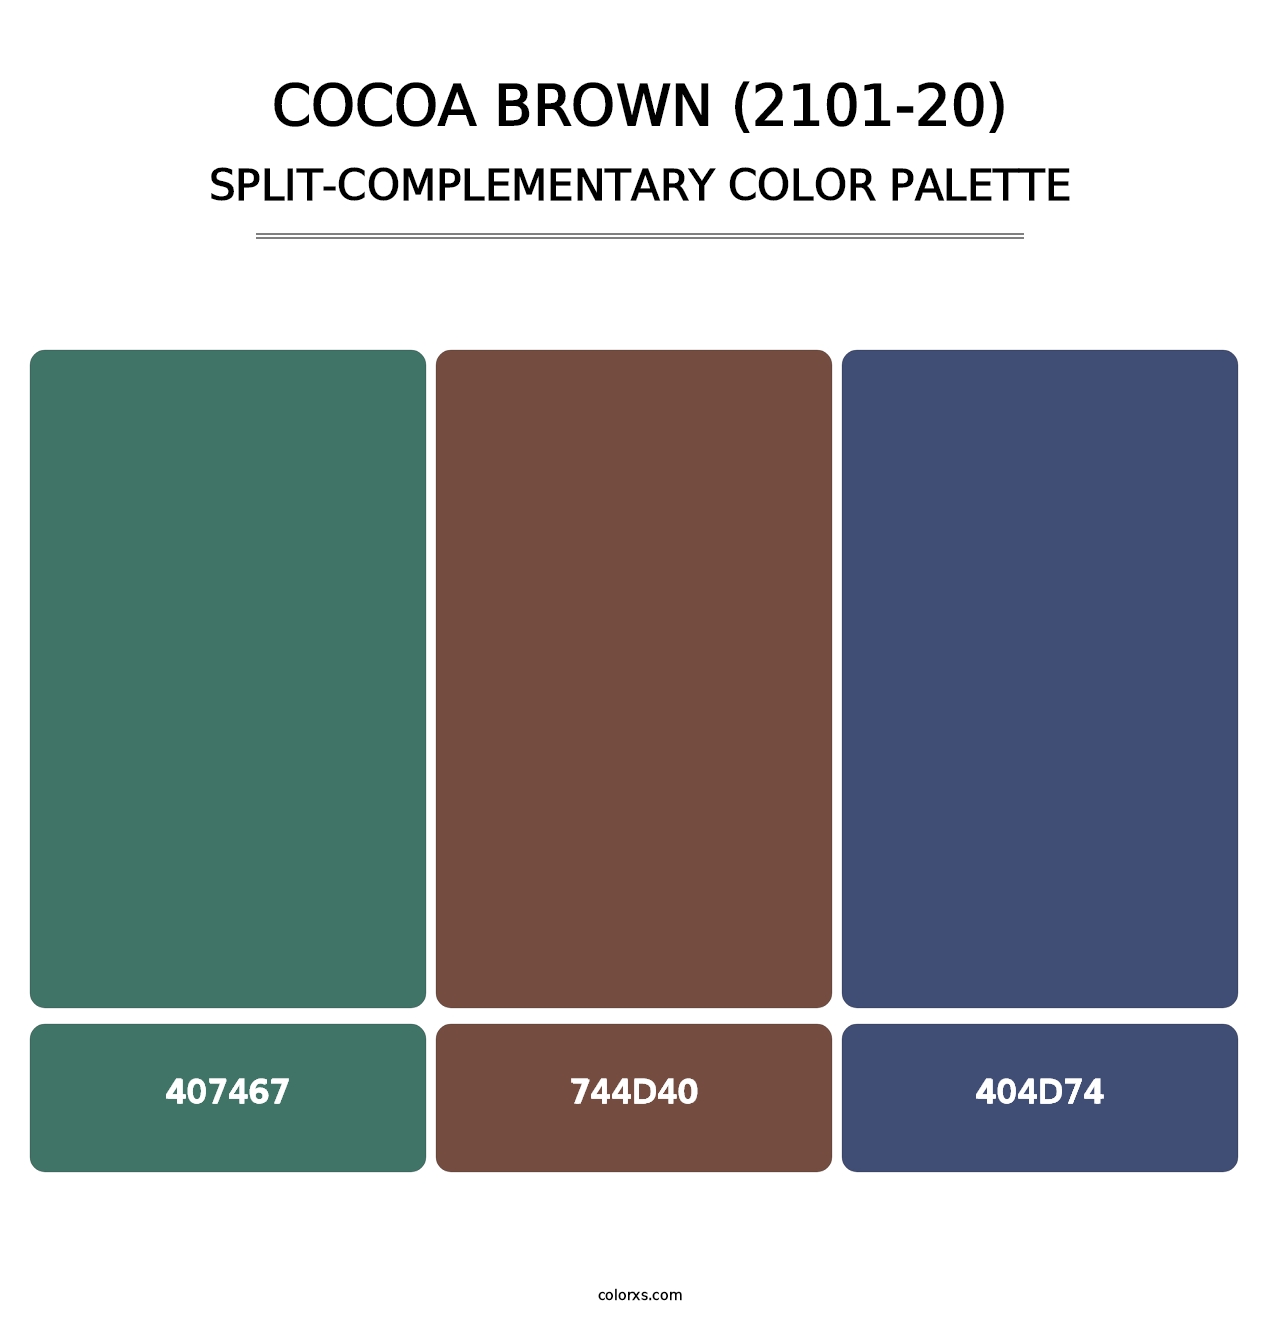 Cocoa Brown (2101-20) - Split-Complementary Color Palette